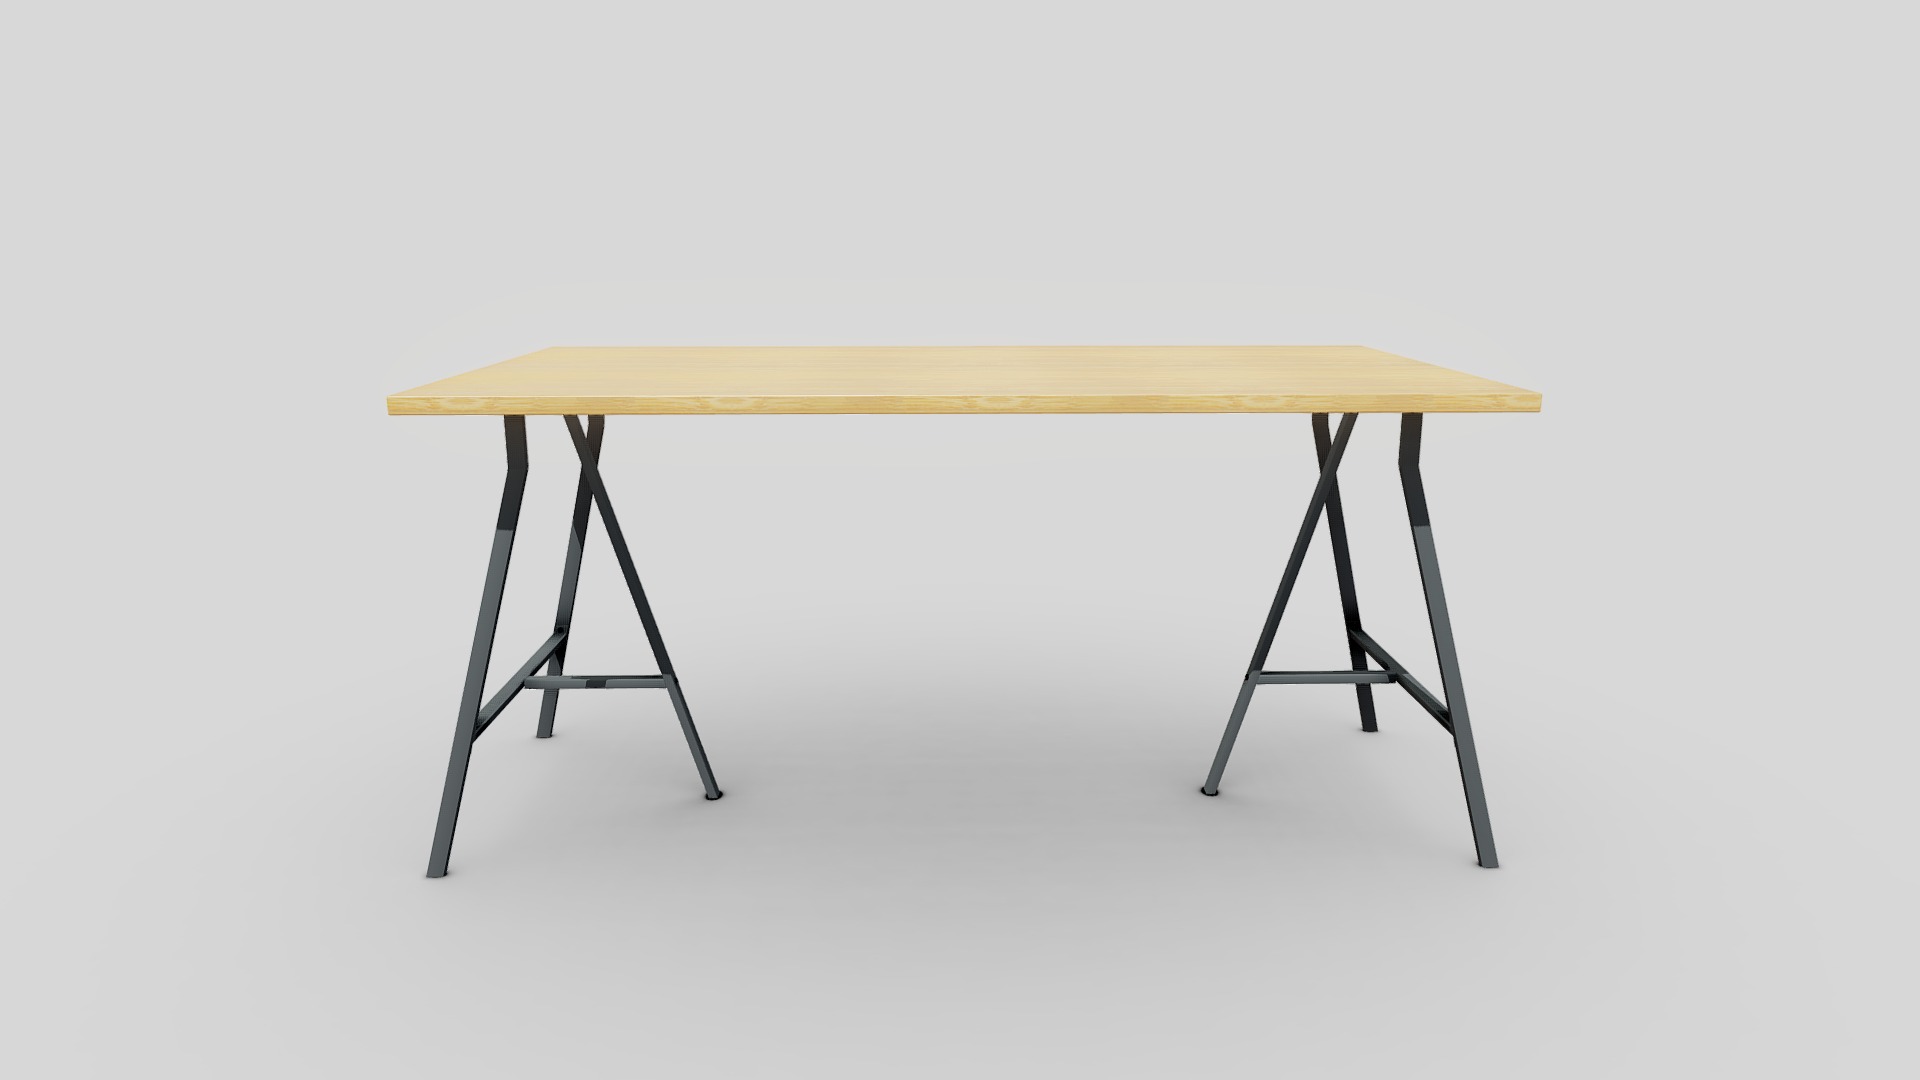 3D model IKEA DESK LERBERG - This is a 3D model of the IKEA DESK LERBERG. The 3D model is about a table with legs.